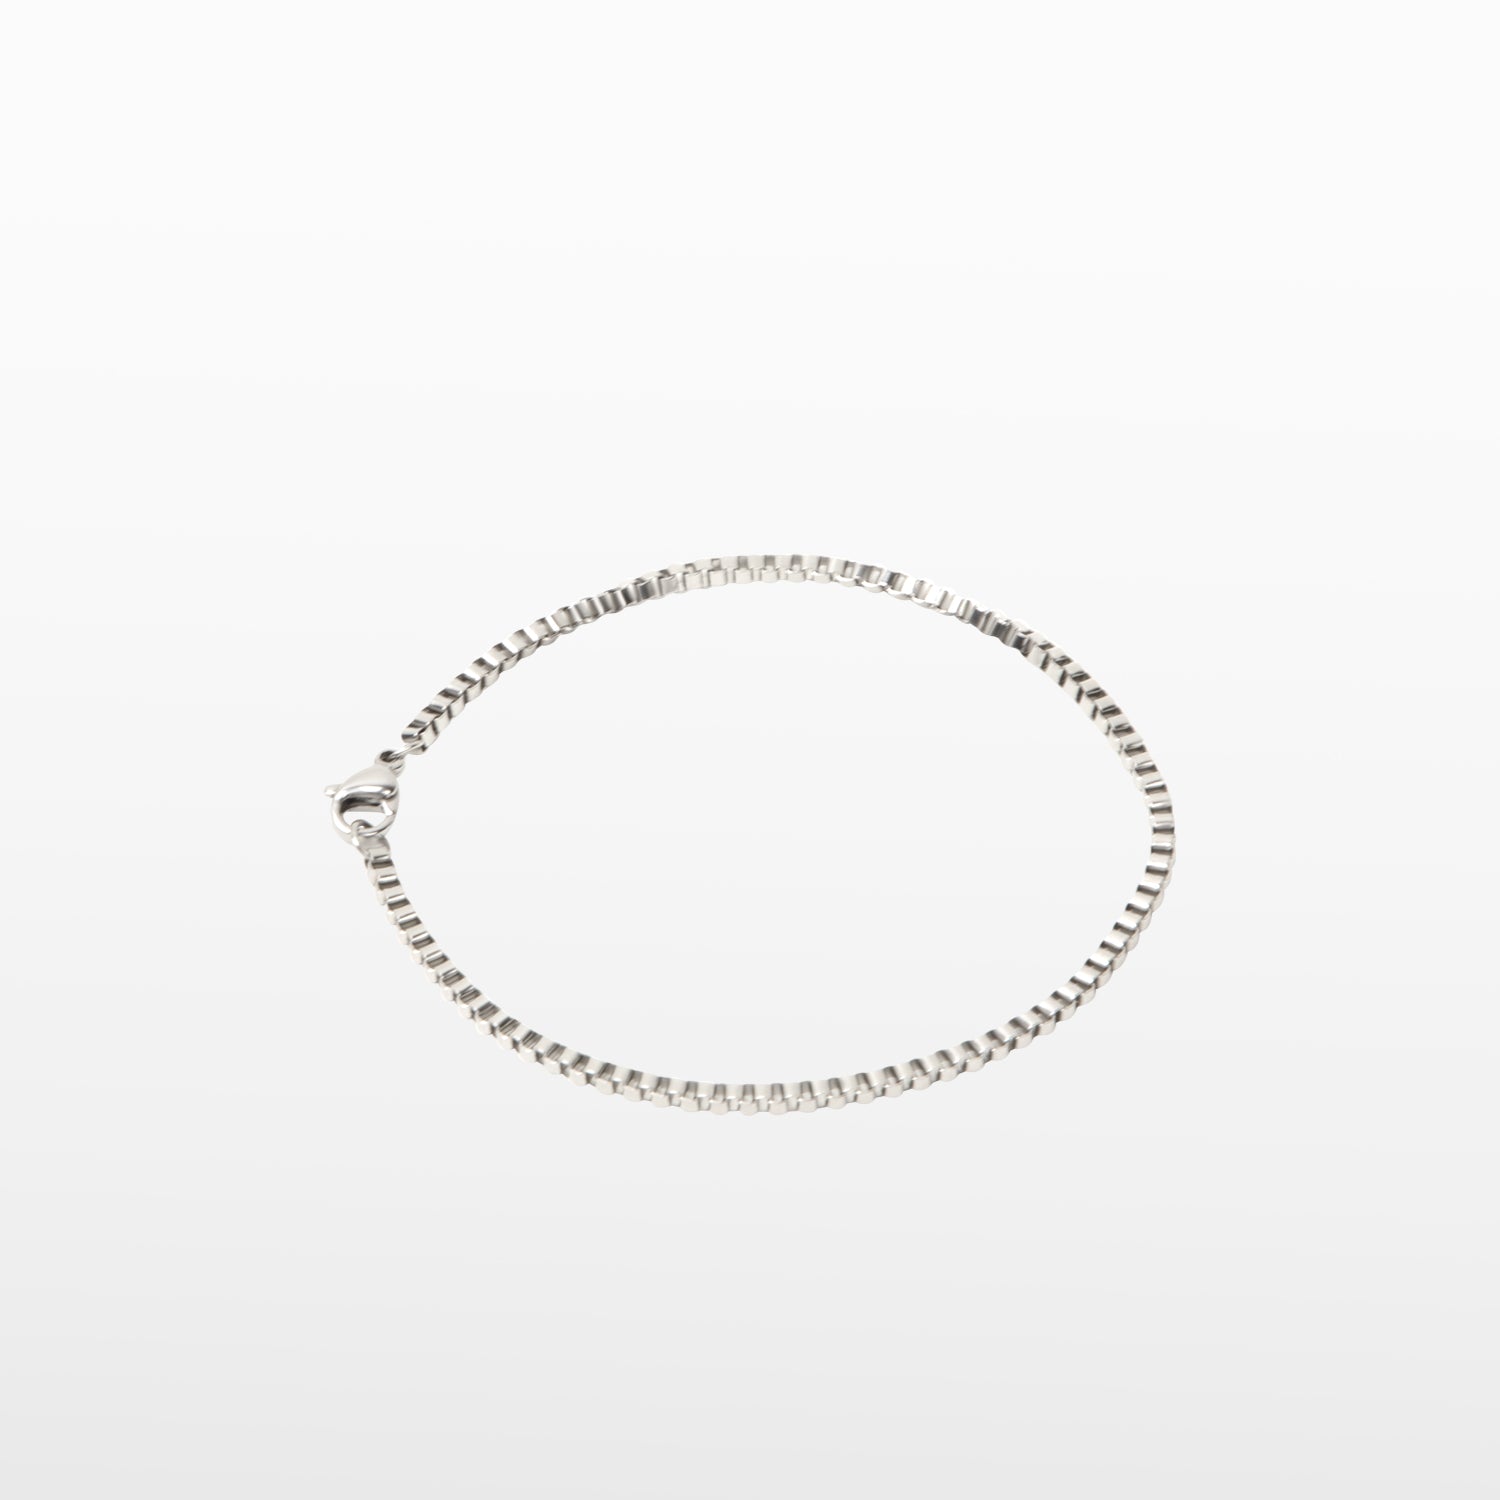 Image of the Box Chain Bracelet in Silver is Stainless Steel, offering a non-tarnish, water-resistant finish.